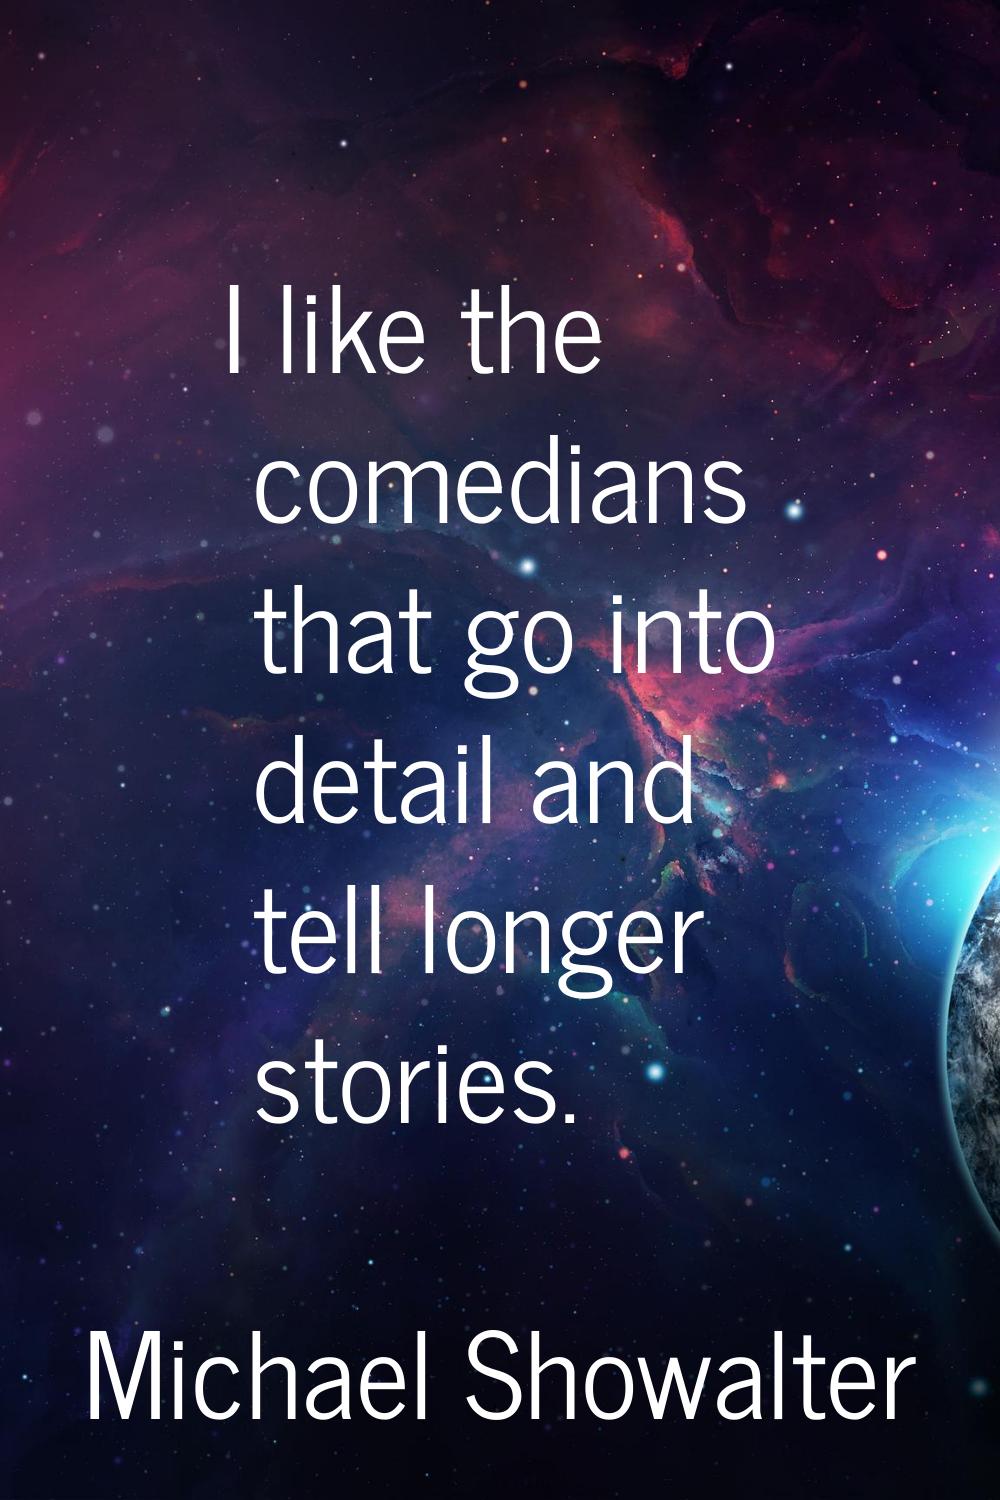 I like the comedians that go into detail and tell longer stories.